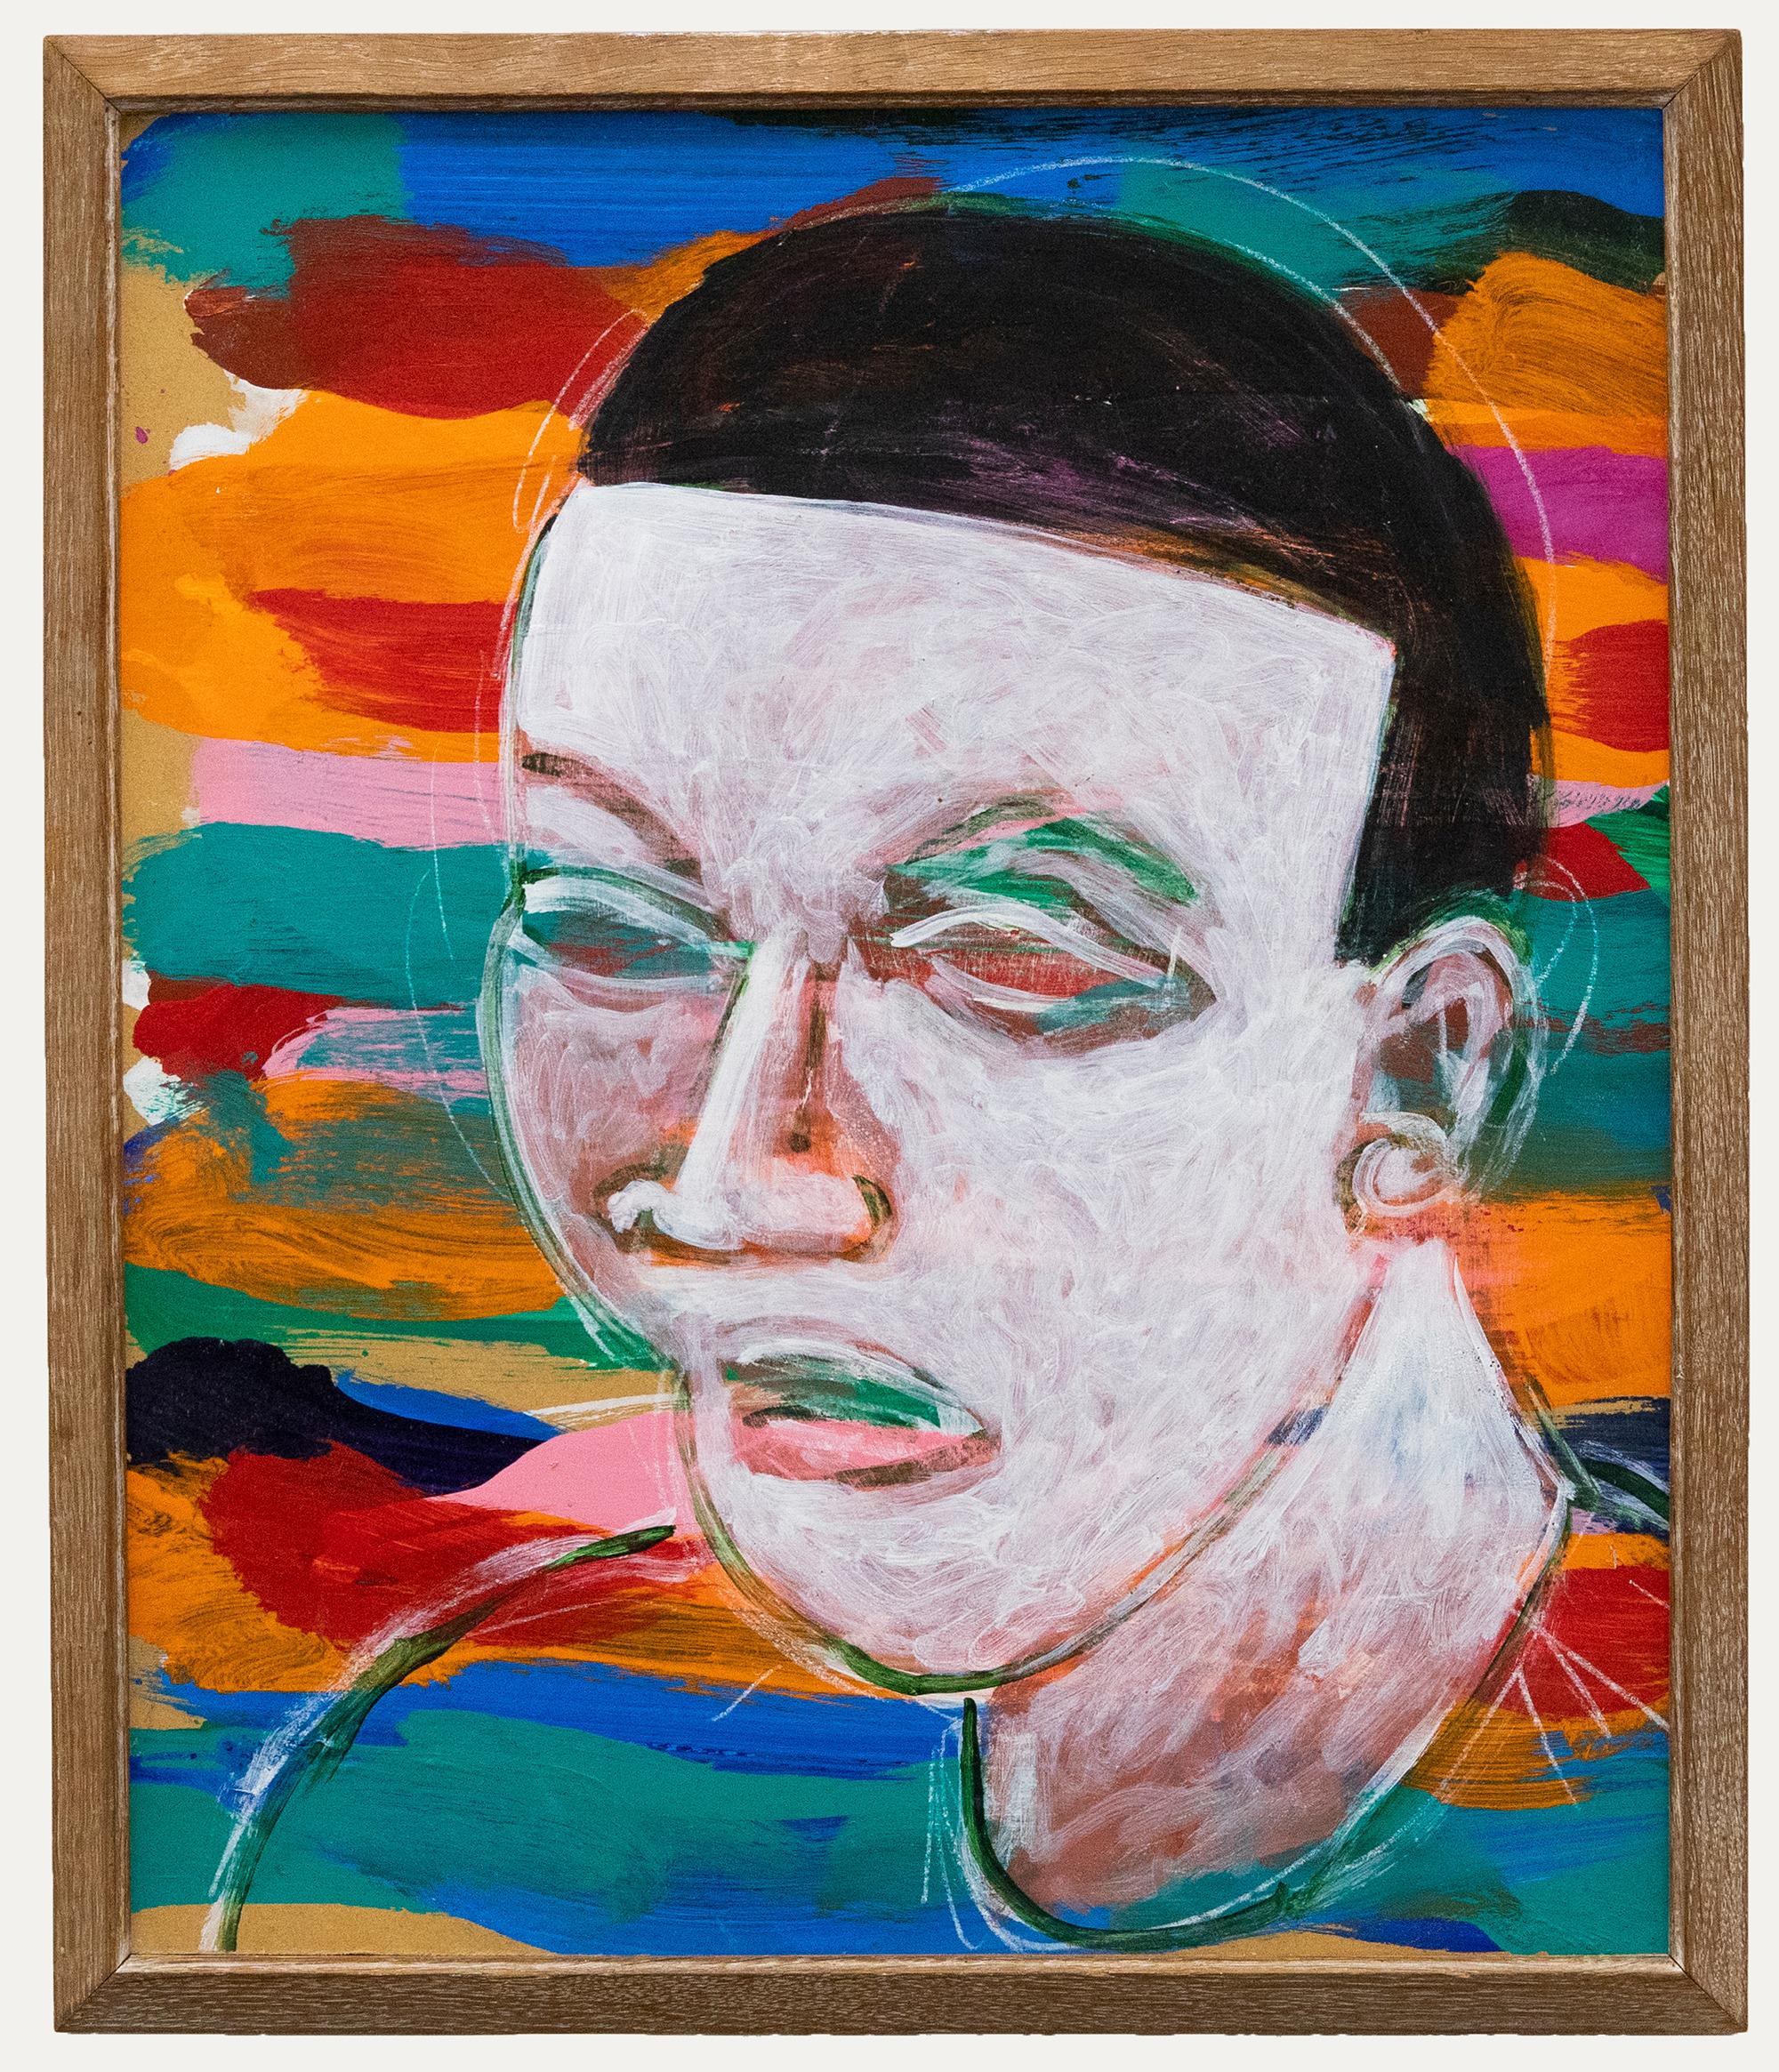 Unknown Portrait Painting - David Somerville - 2010 Acrylic, Figure in a Rainbow